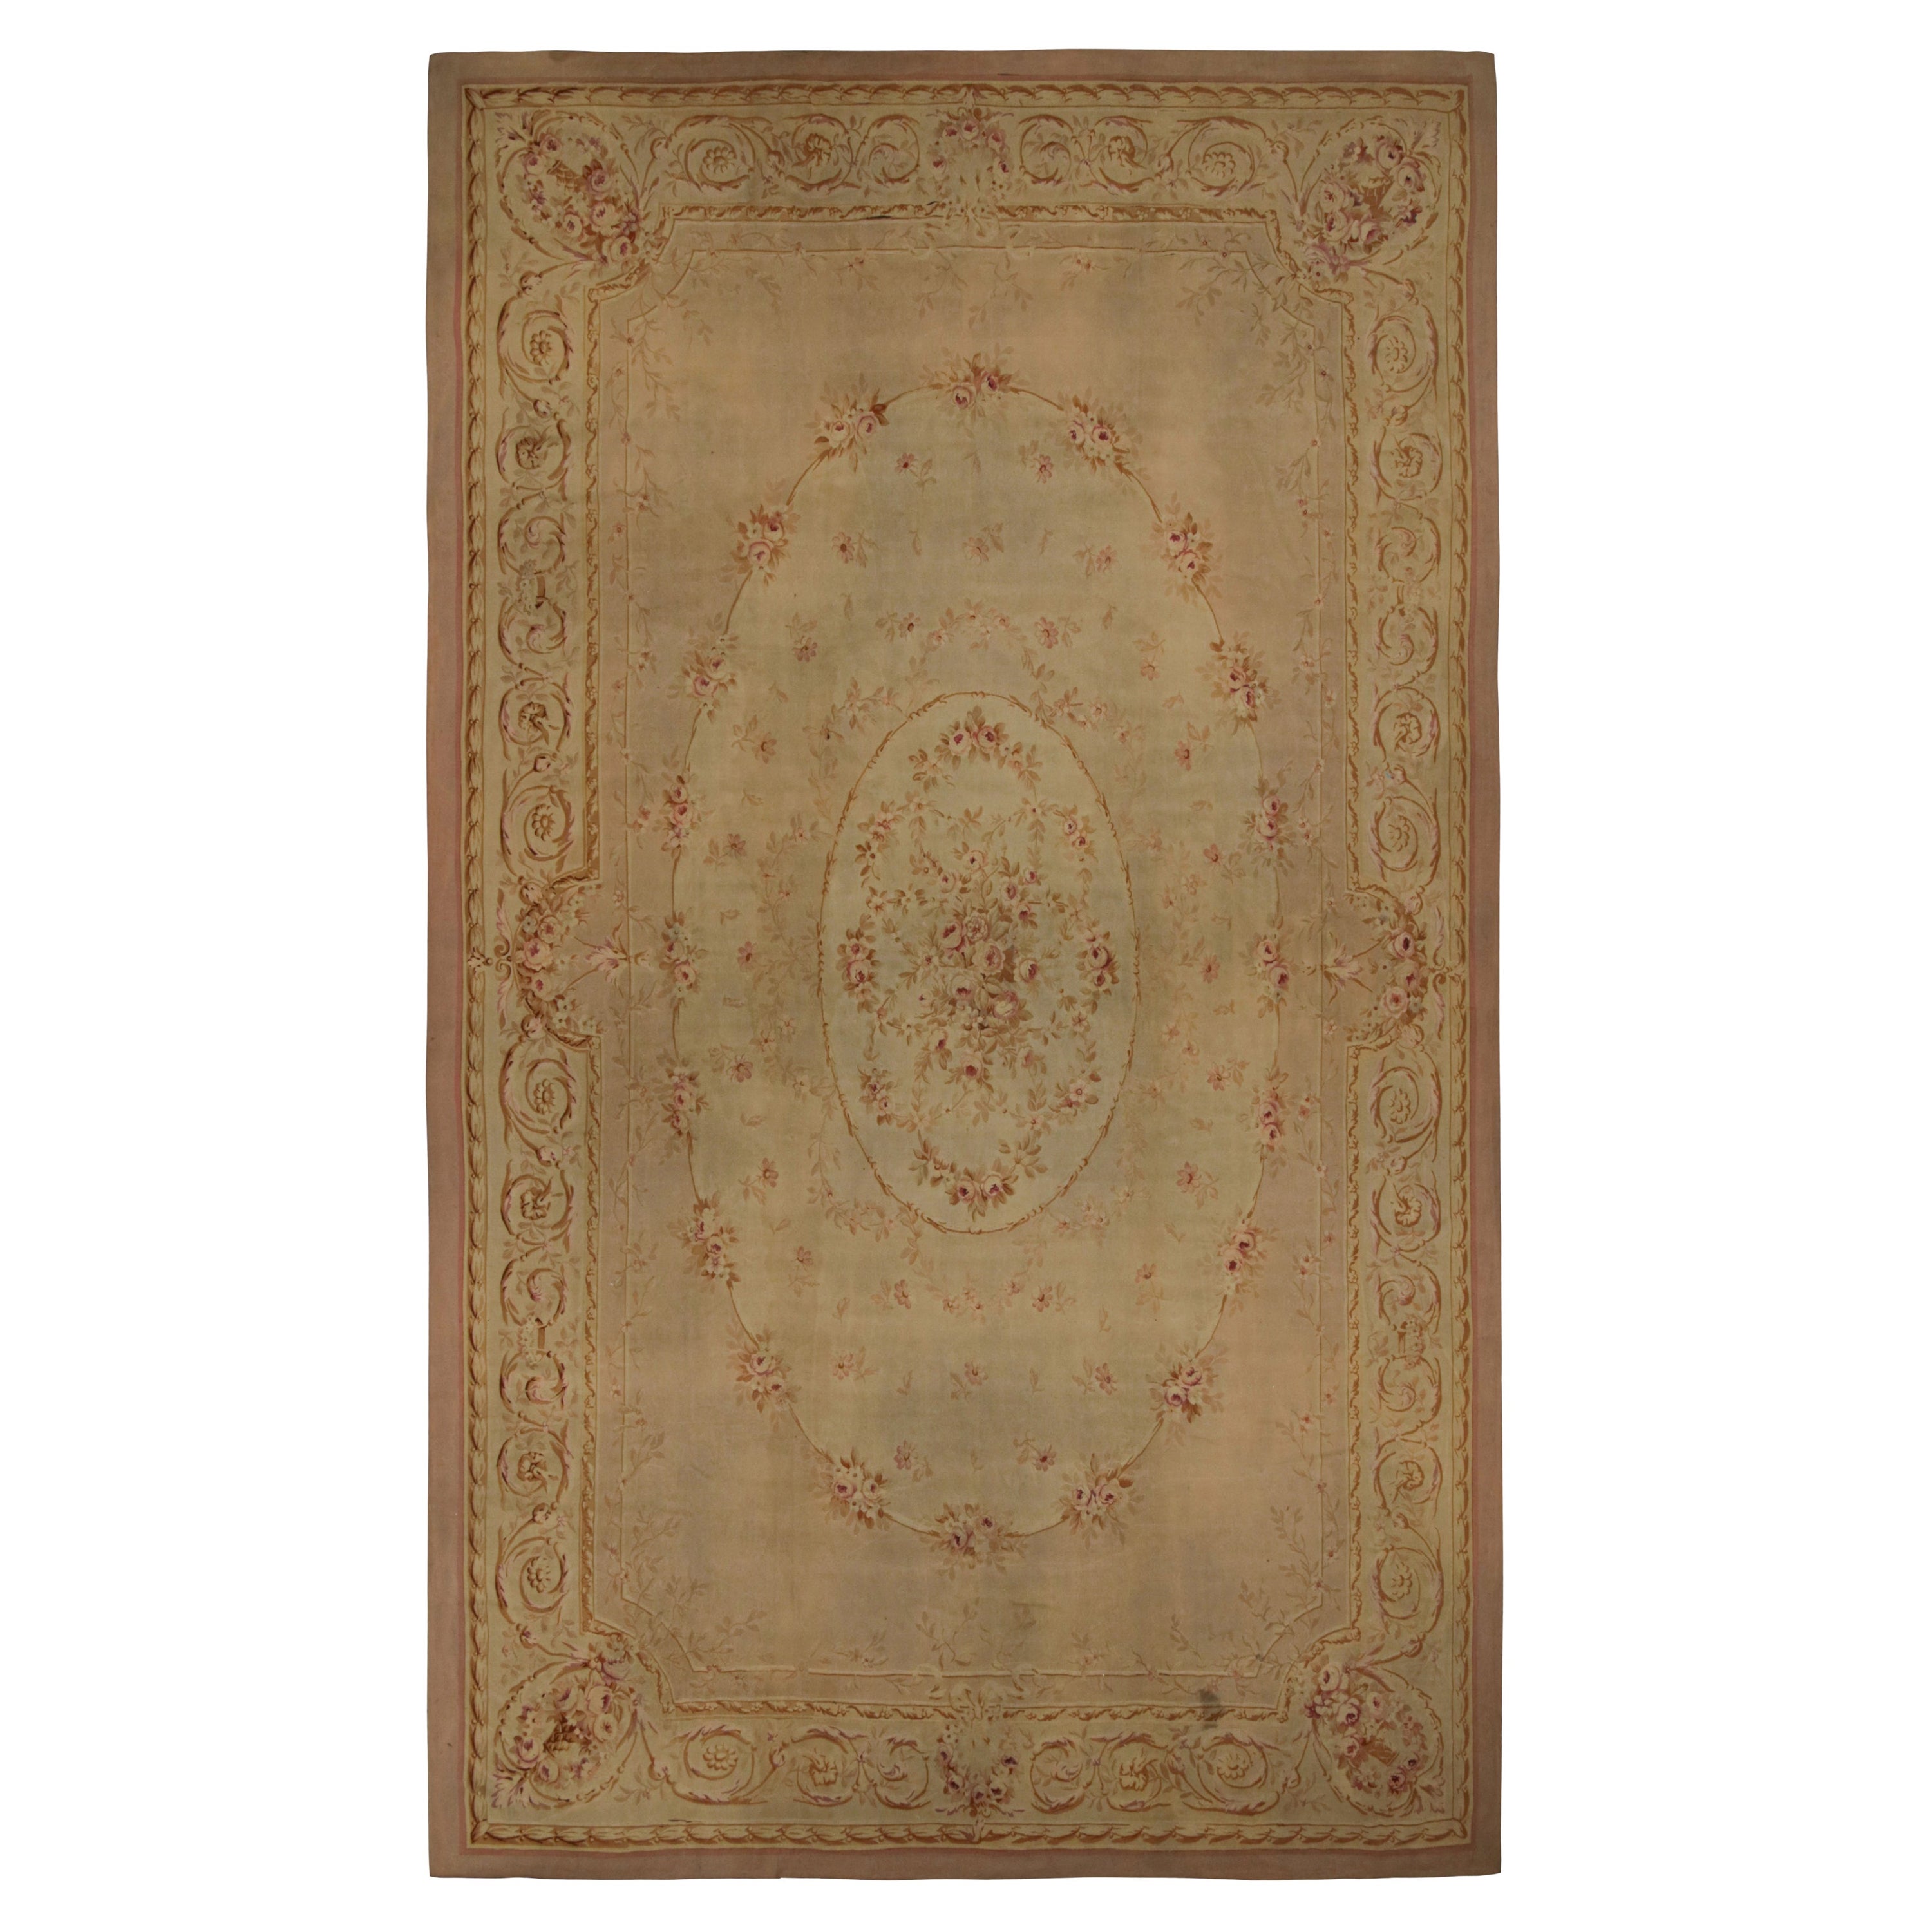 Antique Aubusson Flatweave Oversized Rug in Cream with Florals